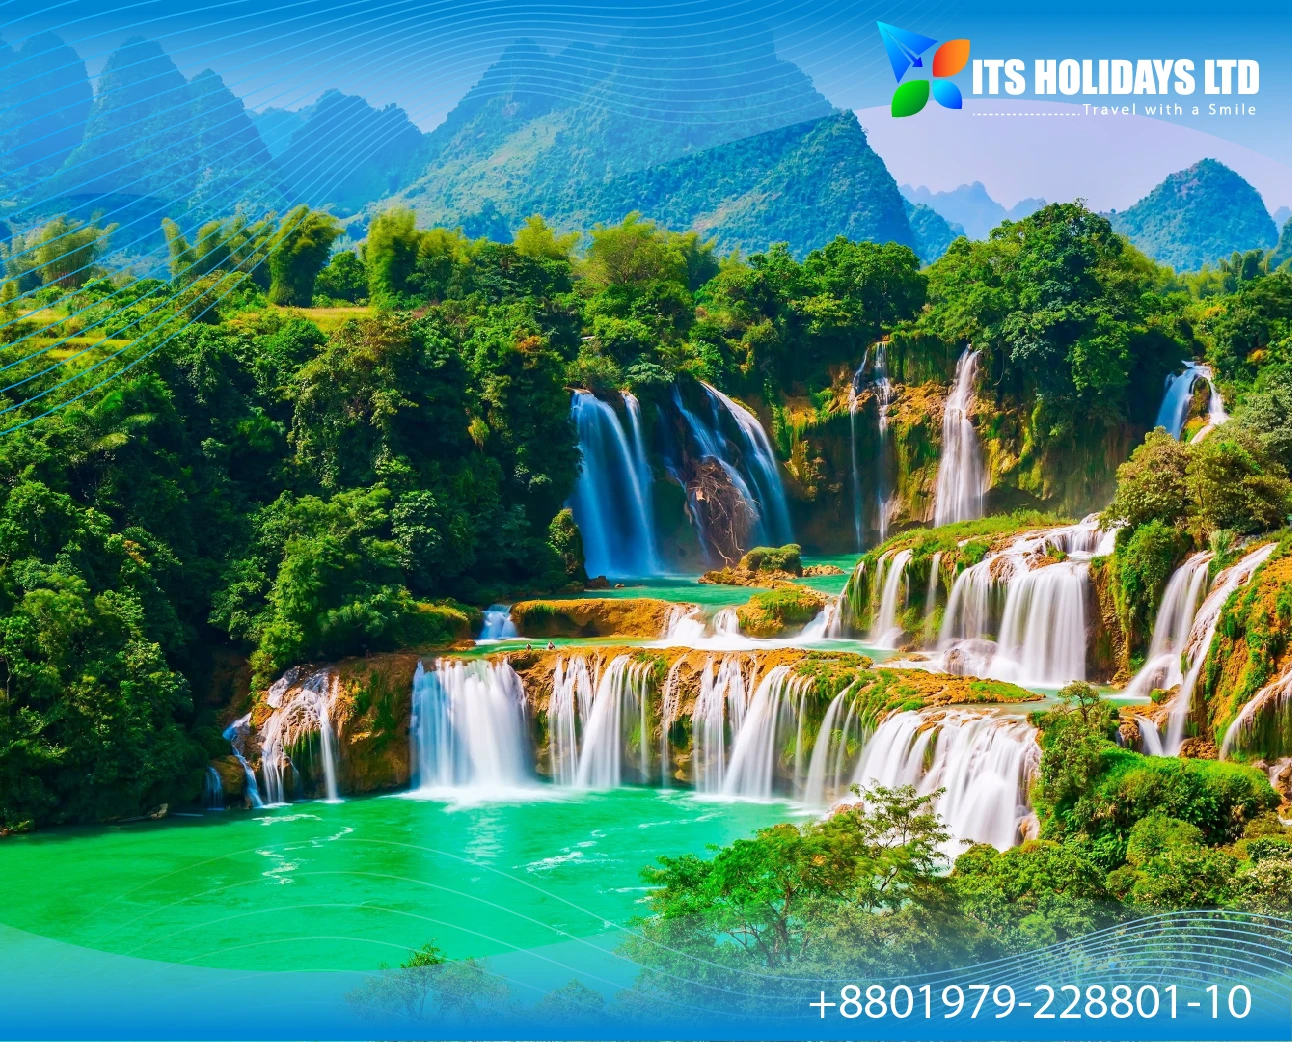 Hanoi & Ho Chi Minh Tour Package From Bangladesh